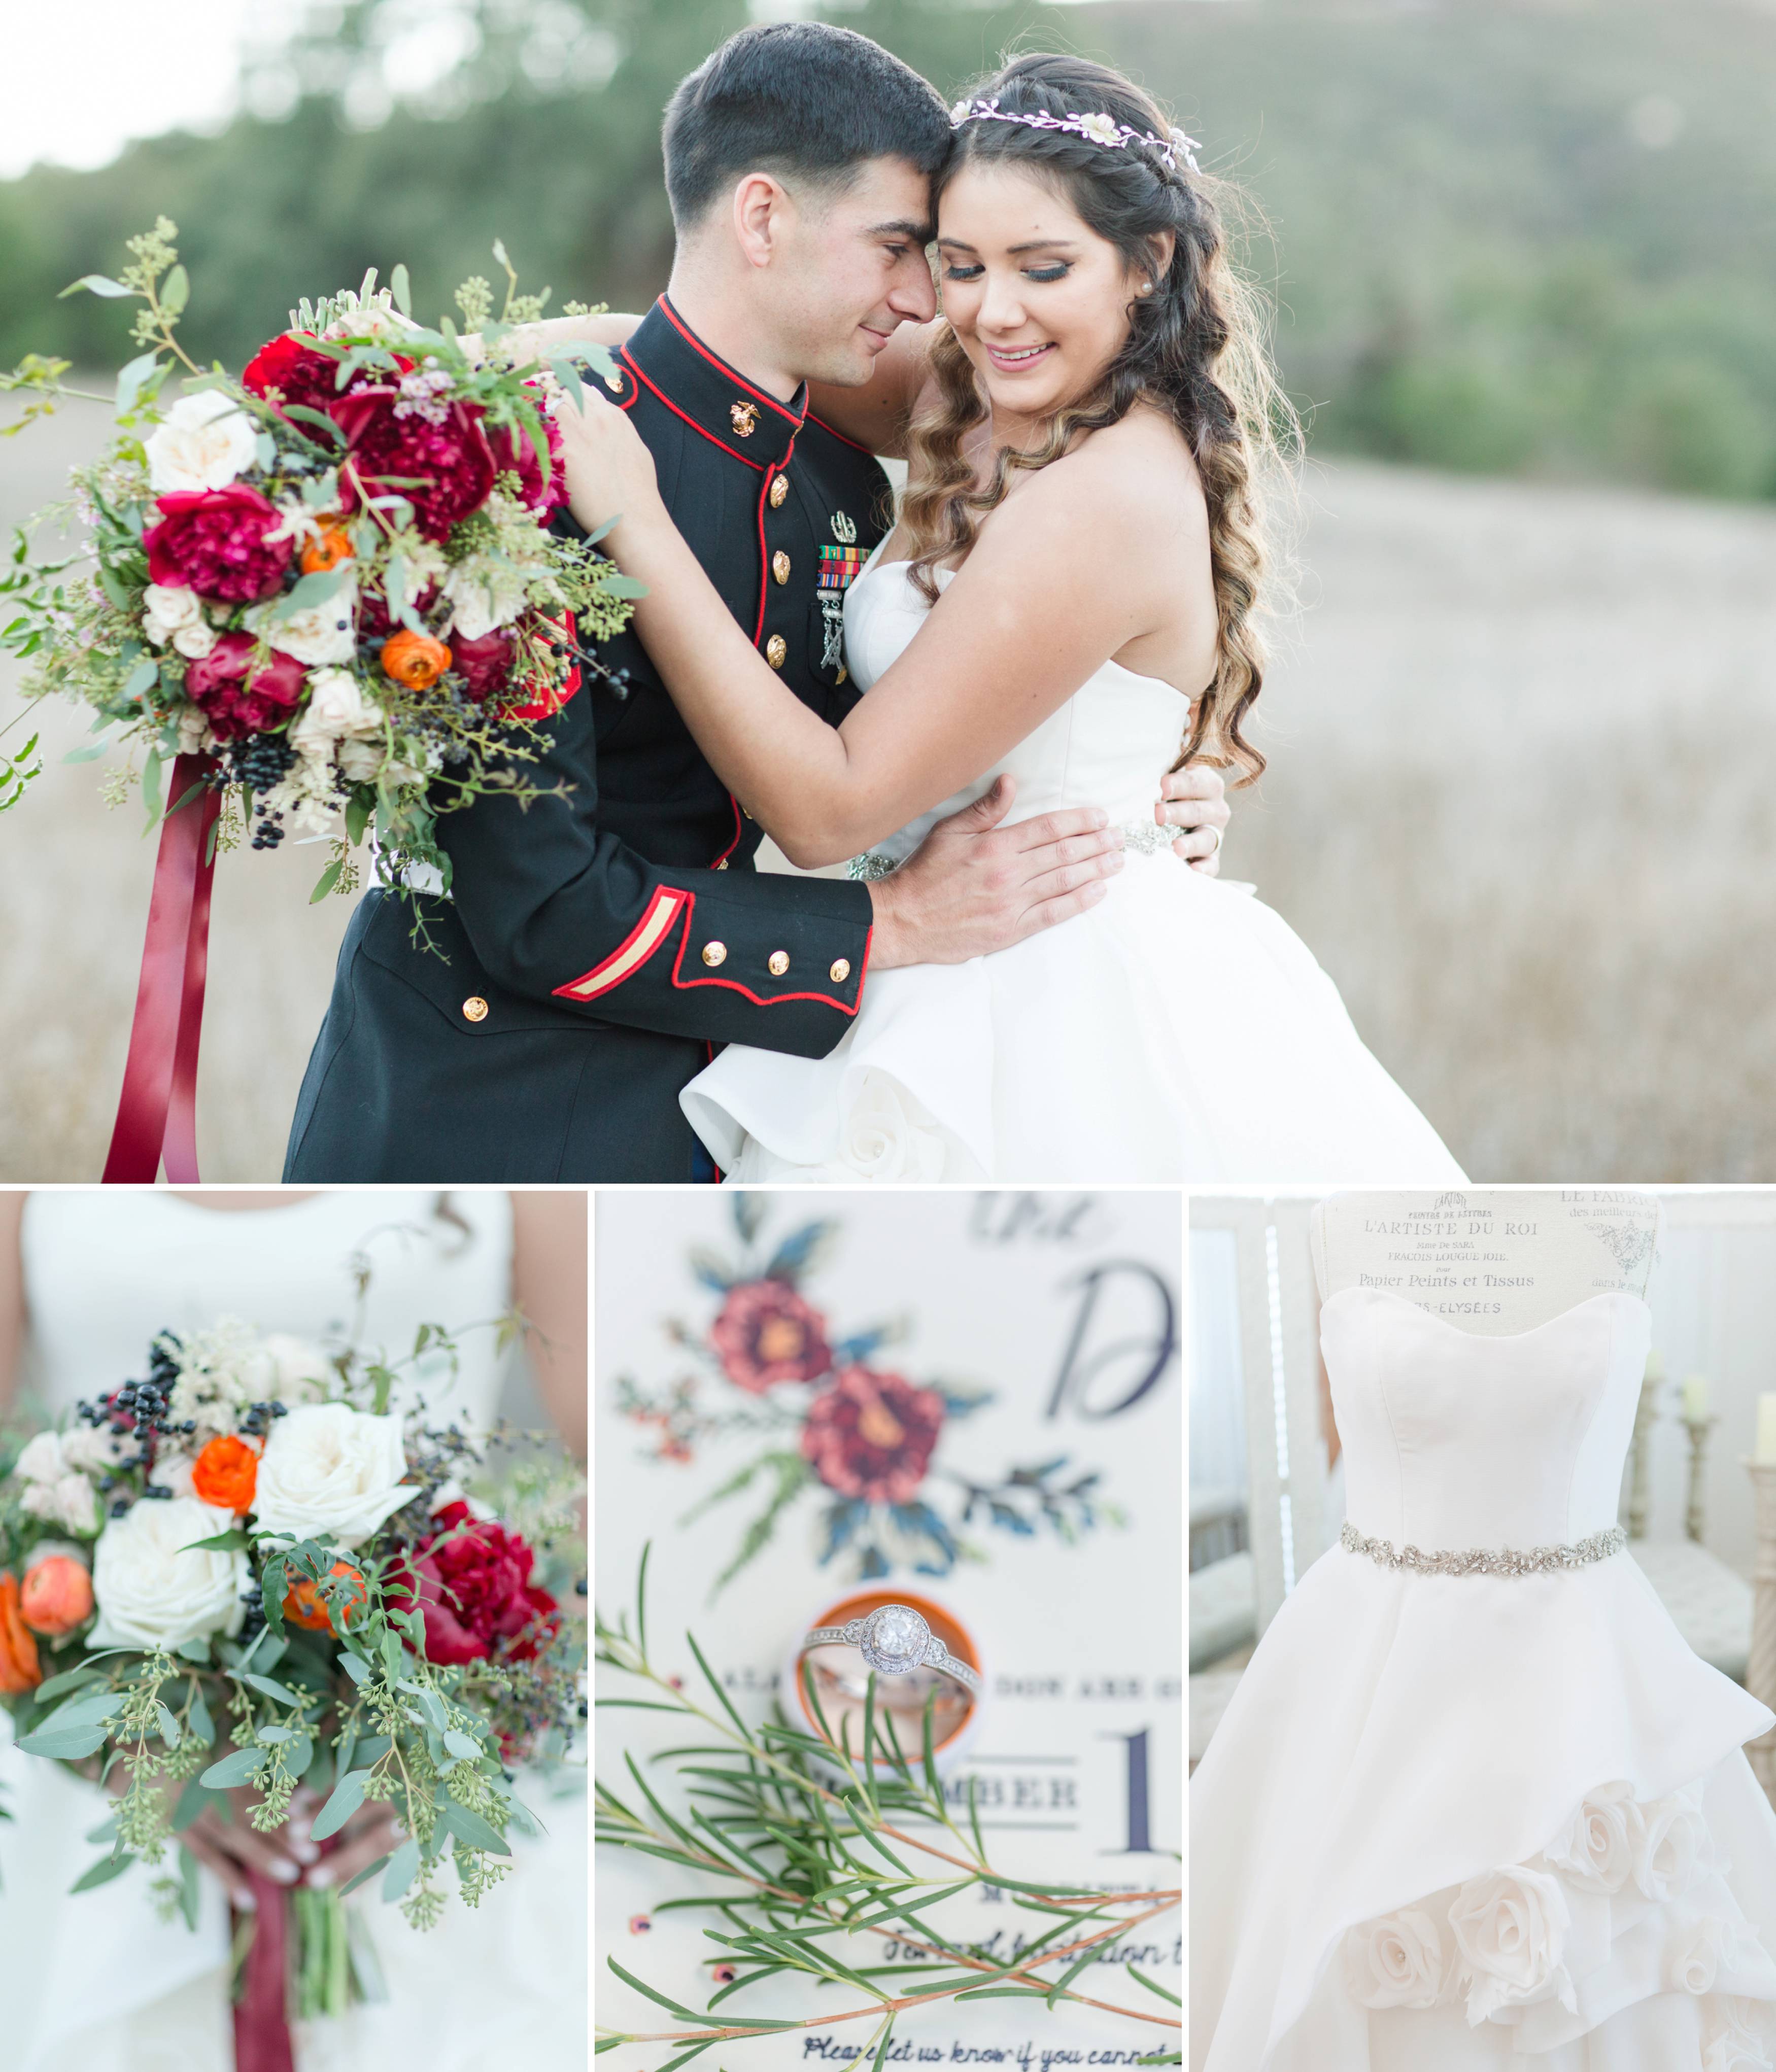 bride and groom and wedding details Forever and always farm Temecula California wedding engagement family maternity photography Carrie McGuire photographer